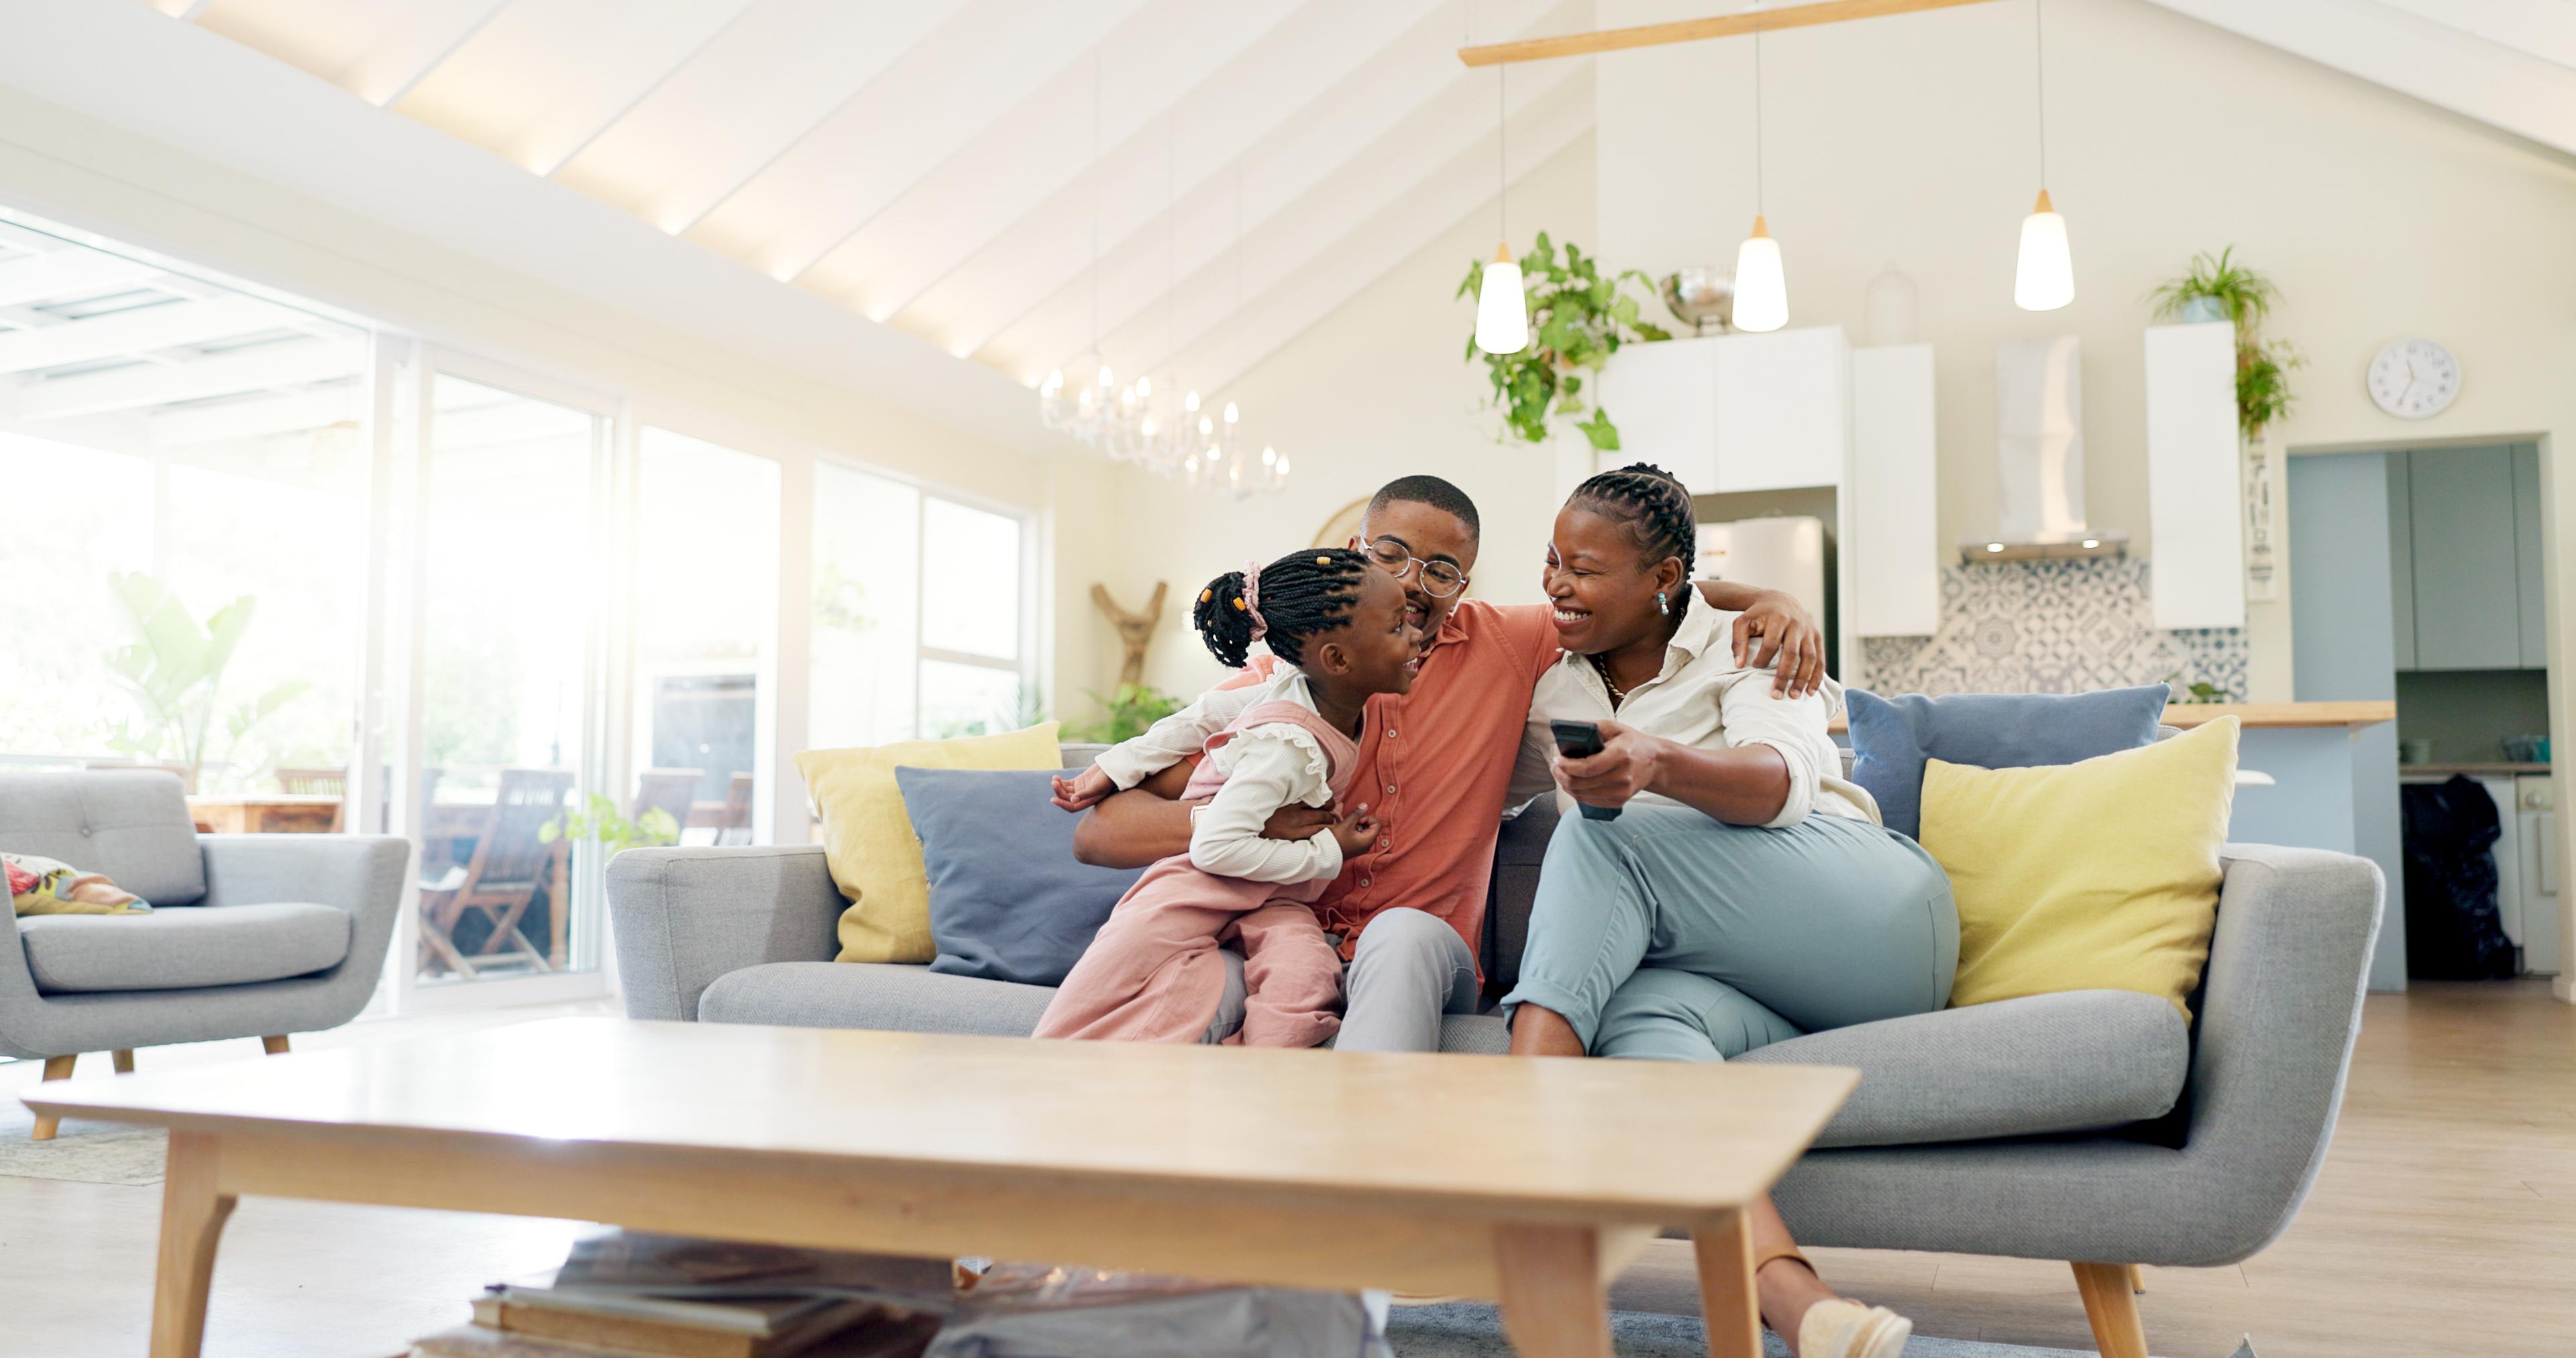 A view of a happy family in a fully furnished living room shows how a family can benefit from using lease-to-own with Acima Leasing.